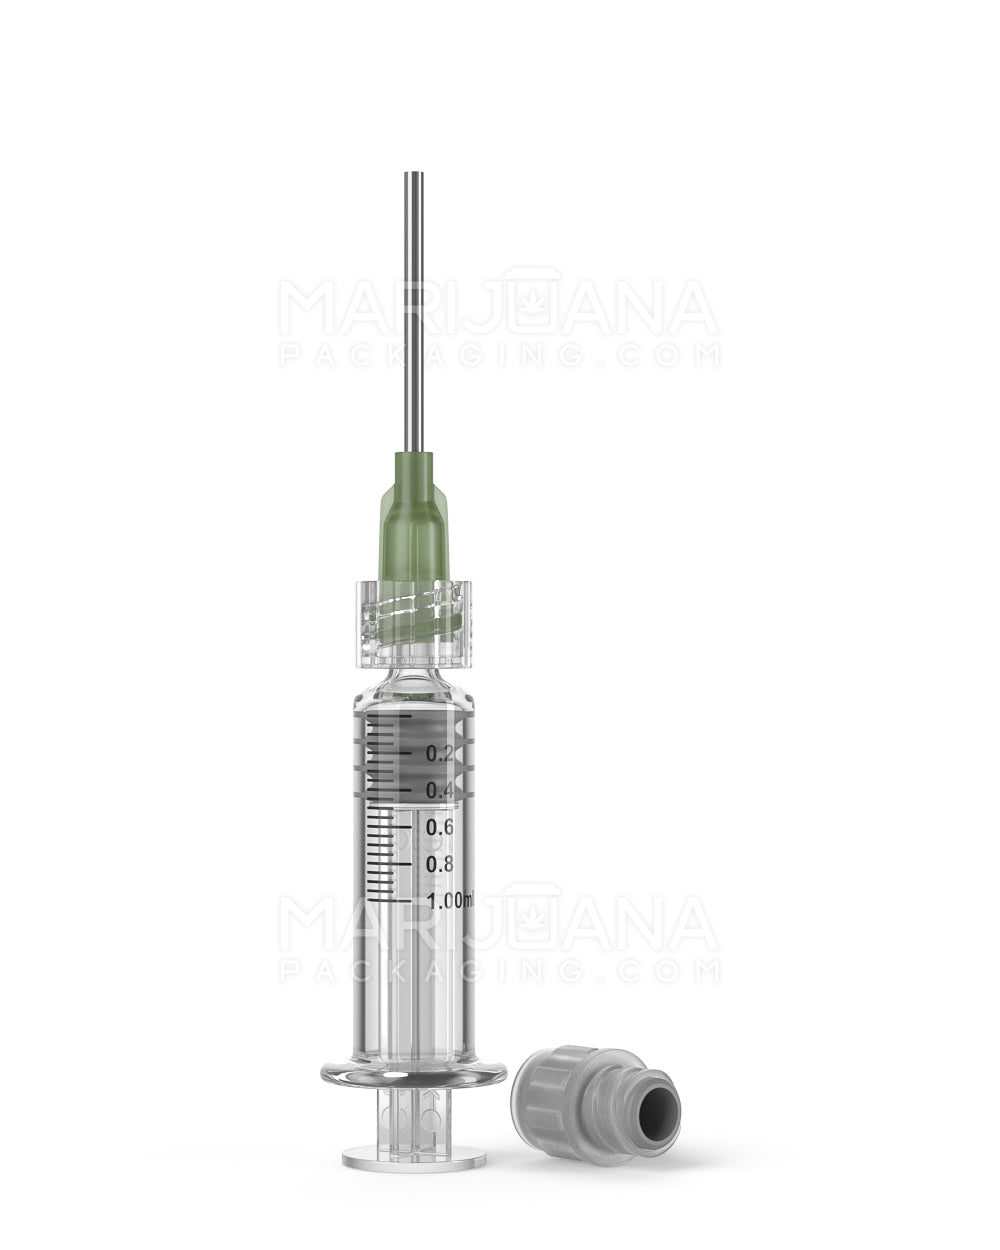 Luer Lock | Glass Dab Applicator Syringes w/ Needle Tip | 1mL - 0.2mL Increments - 100 Count - 9